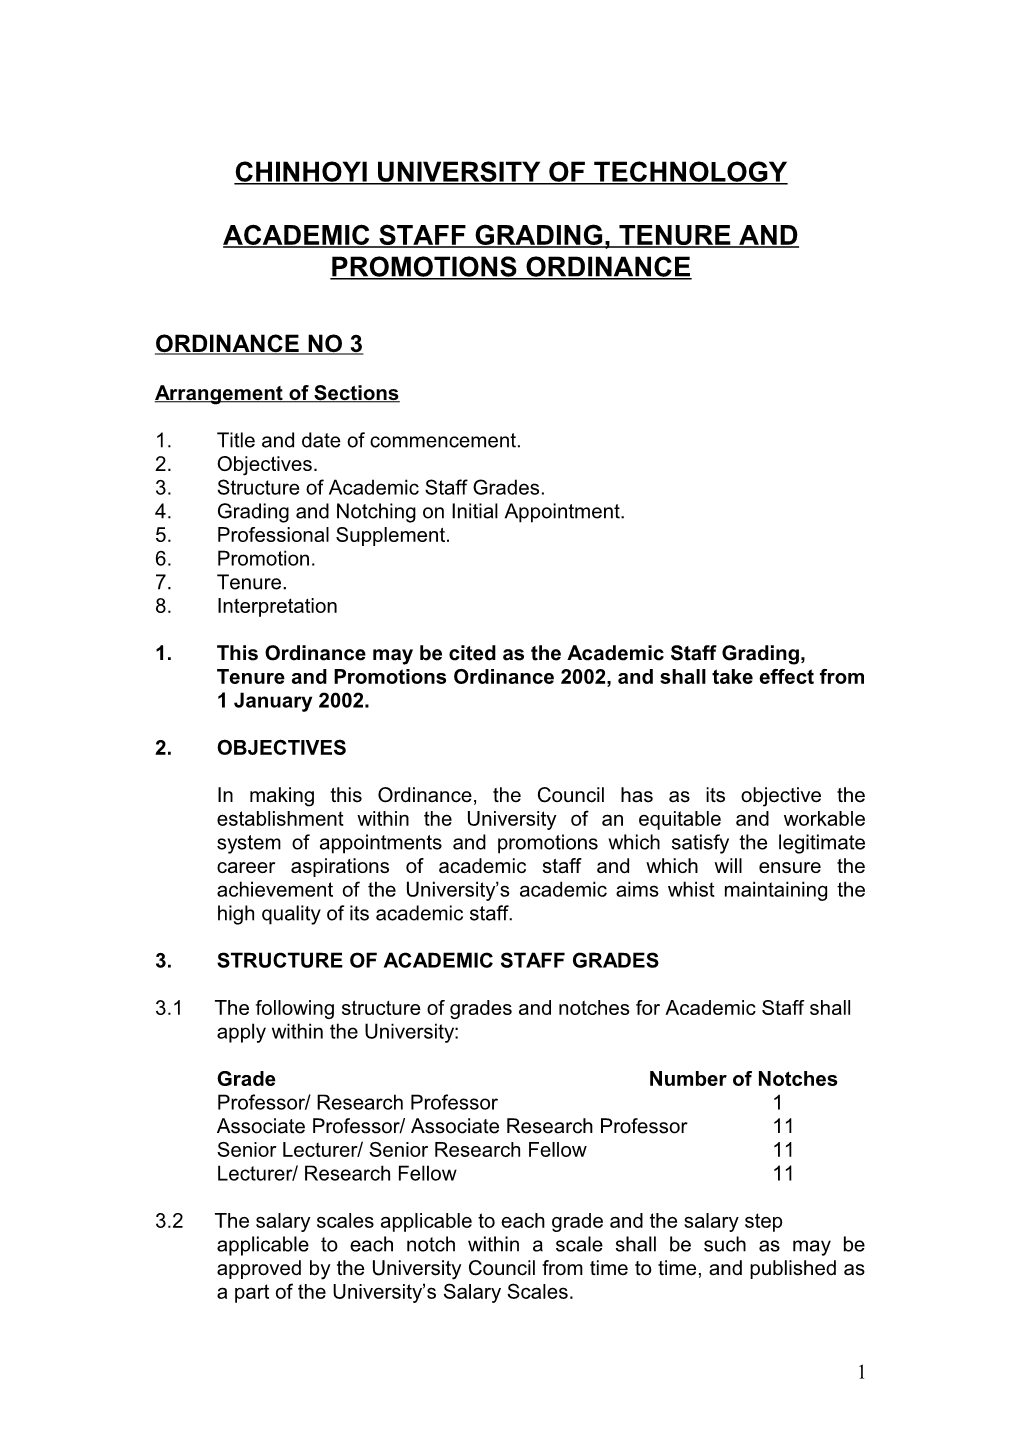 Academic Staff Grading, Tenure and Promotions Ordinance